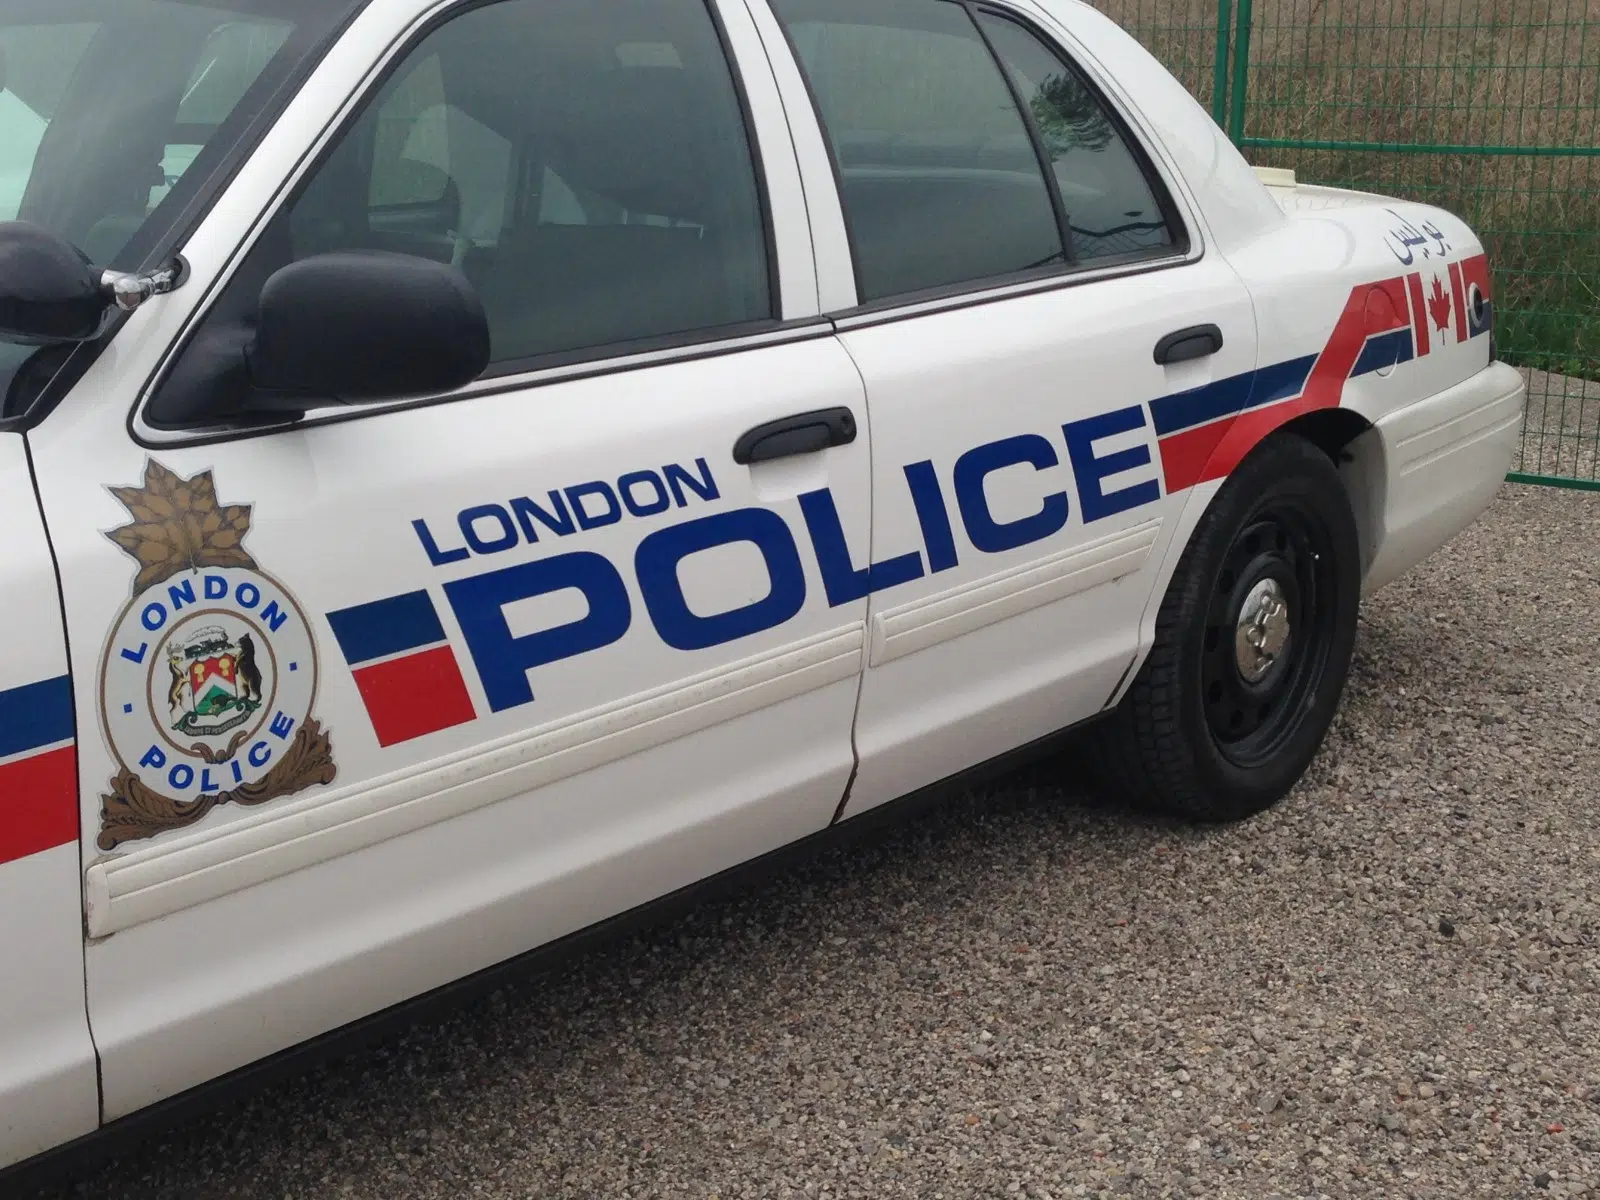 Vehicle chase leads to two arrests in South London